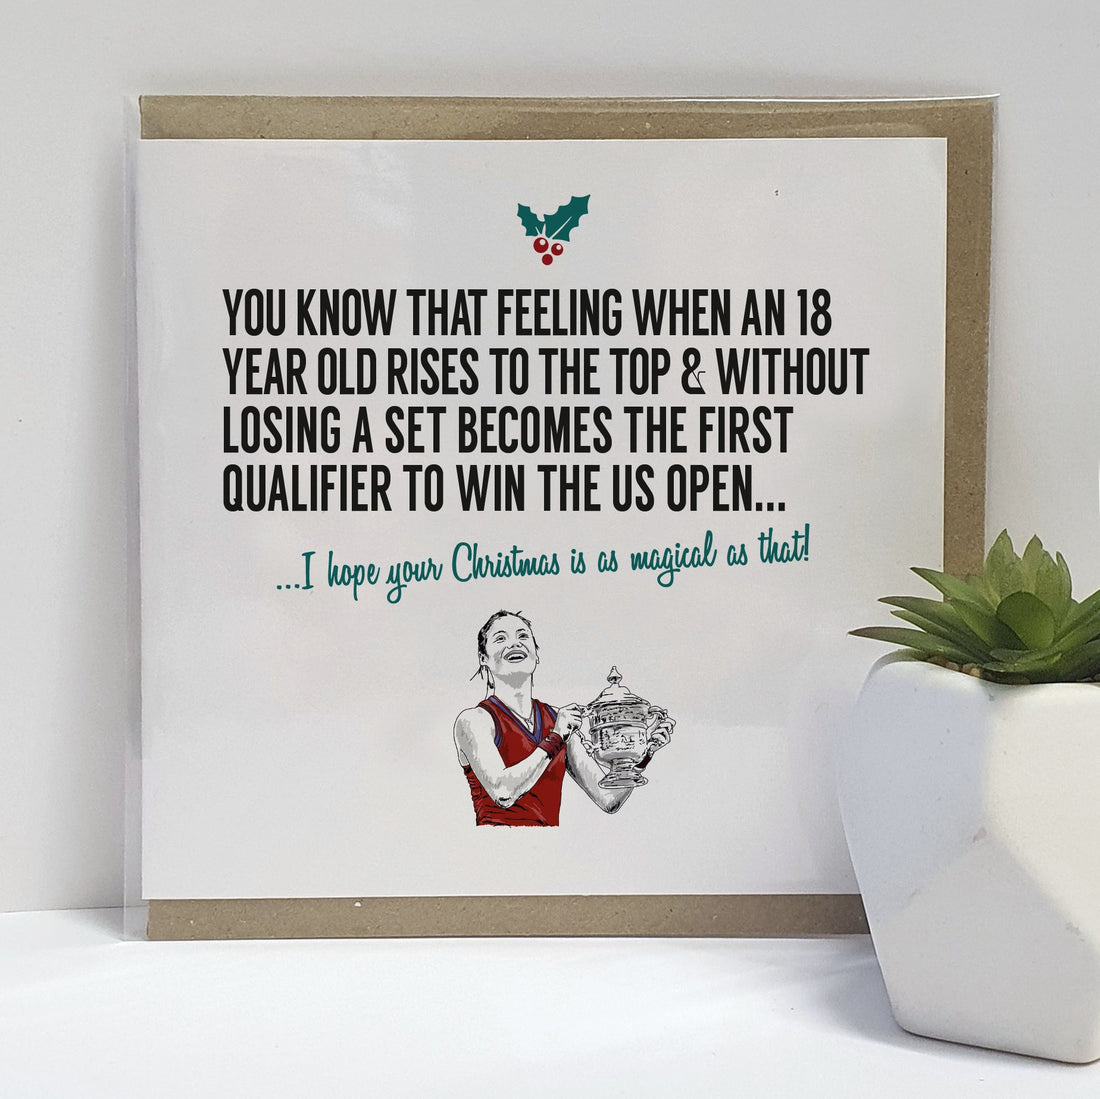 GREETING CARD DESIGNED BY A TOWN CALLED HOME. Card reads: You know that feeling when an 18 year old rises to the top & without losing a set becomes the first qualifier to win the US open... I hope your Christmas is as magical as that!  EMMA RADUCANU 